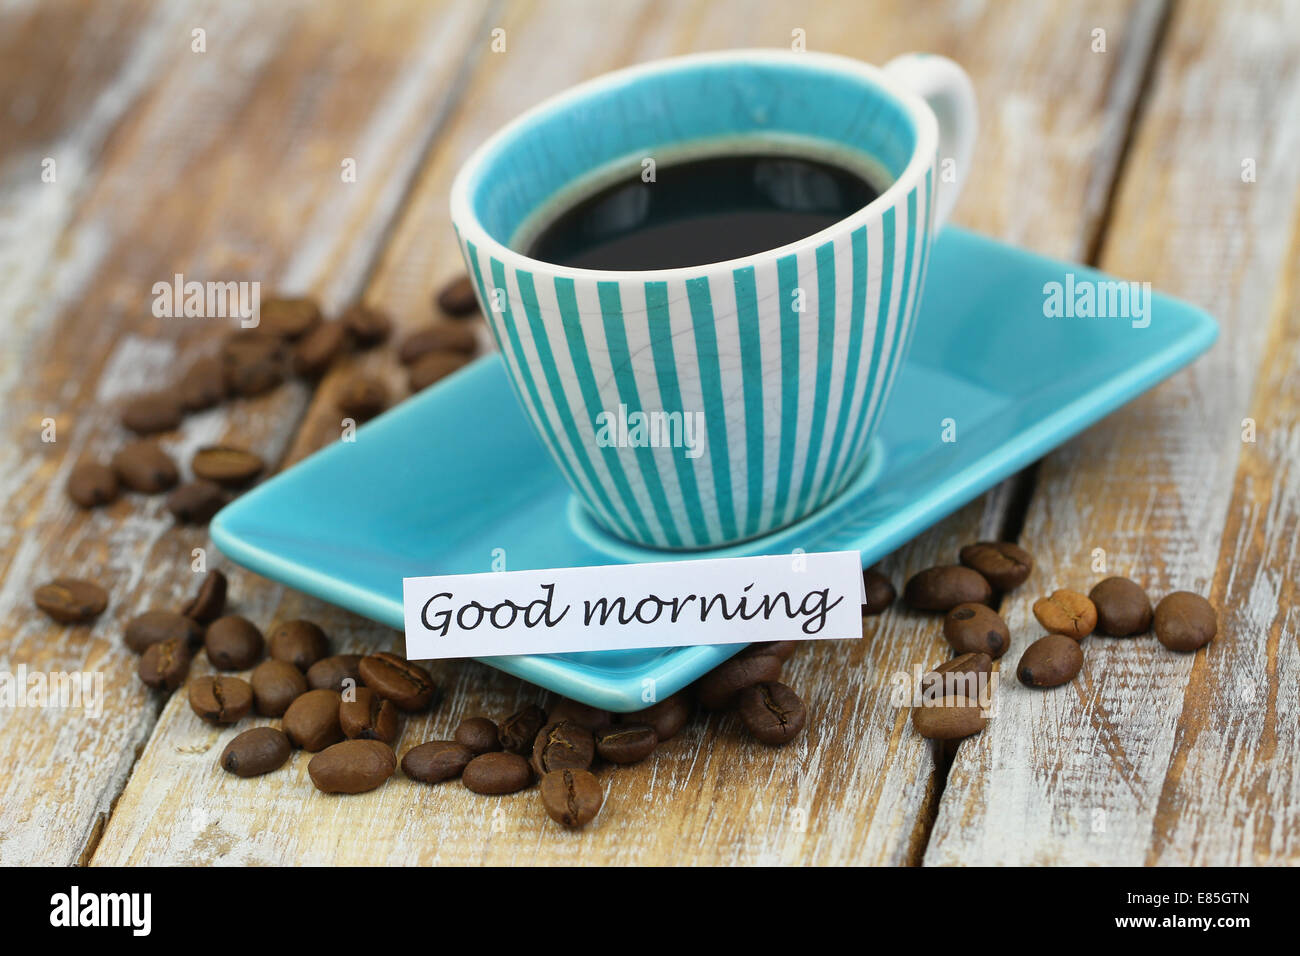 Good morning card with cup of black coffee Stock Photo - Alamy